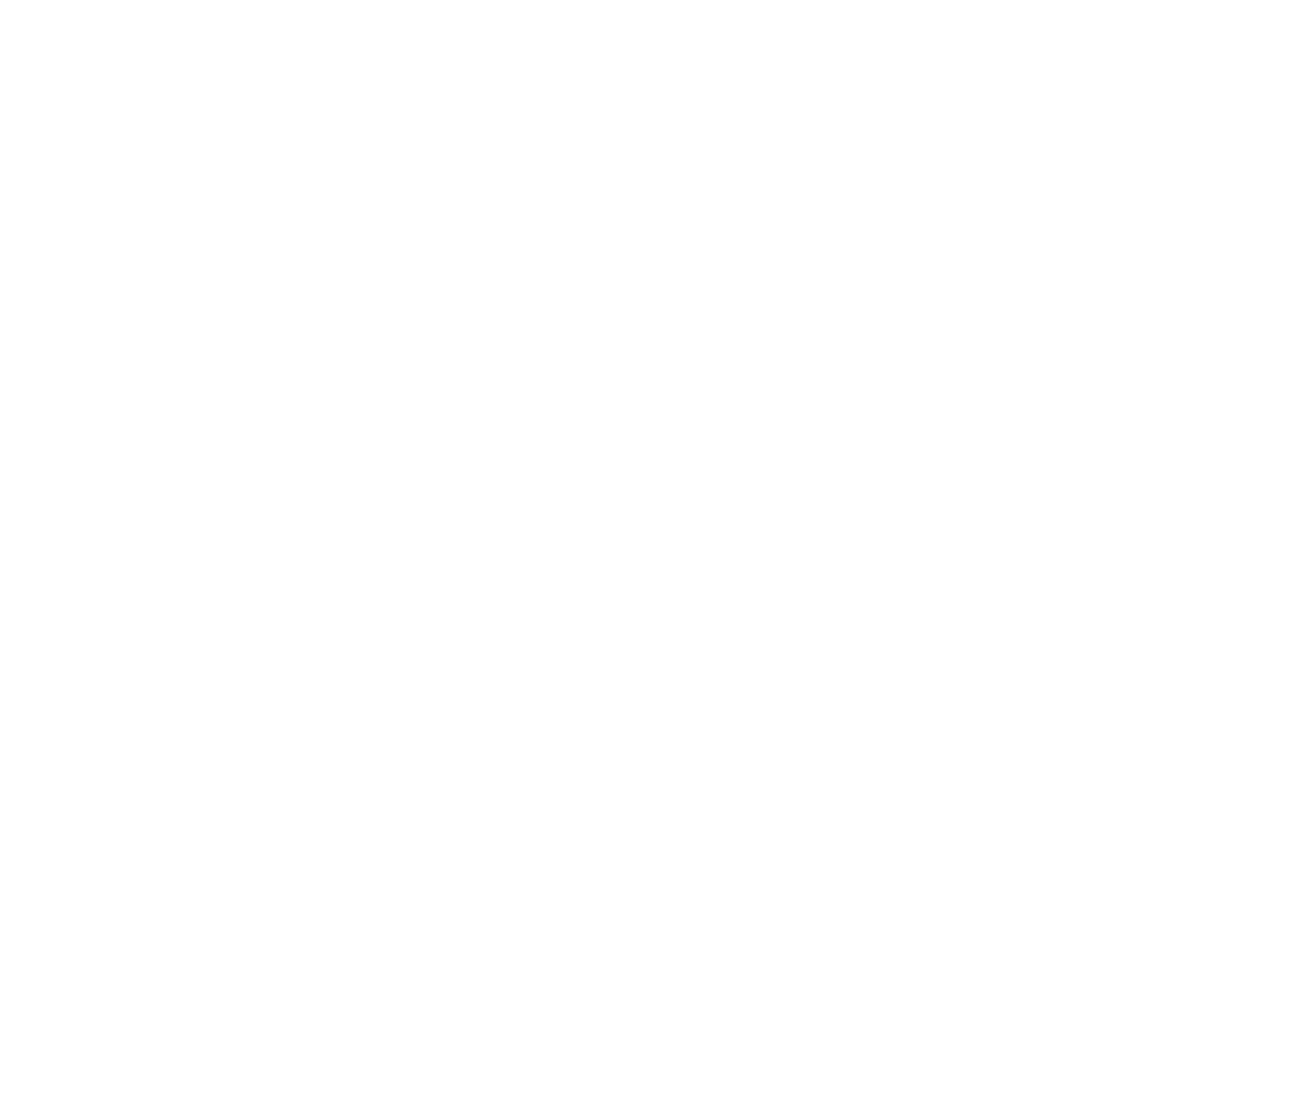 Fruit and vegetables are available each day for students who wish to eat more fruit and vegetables or for students wh...